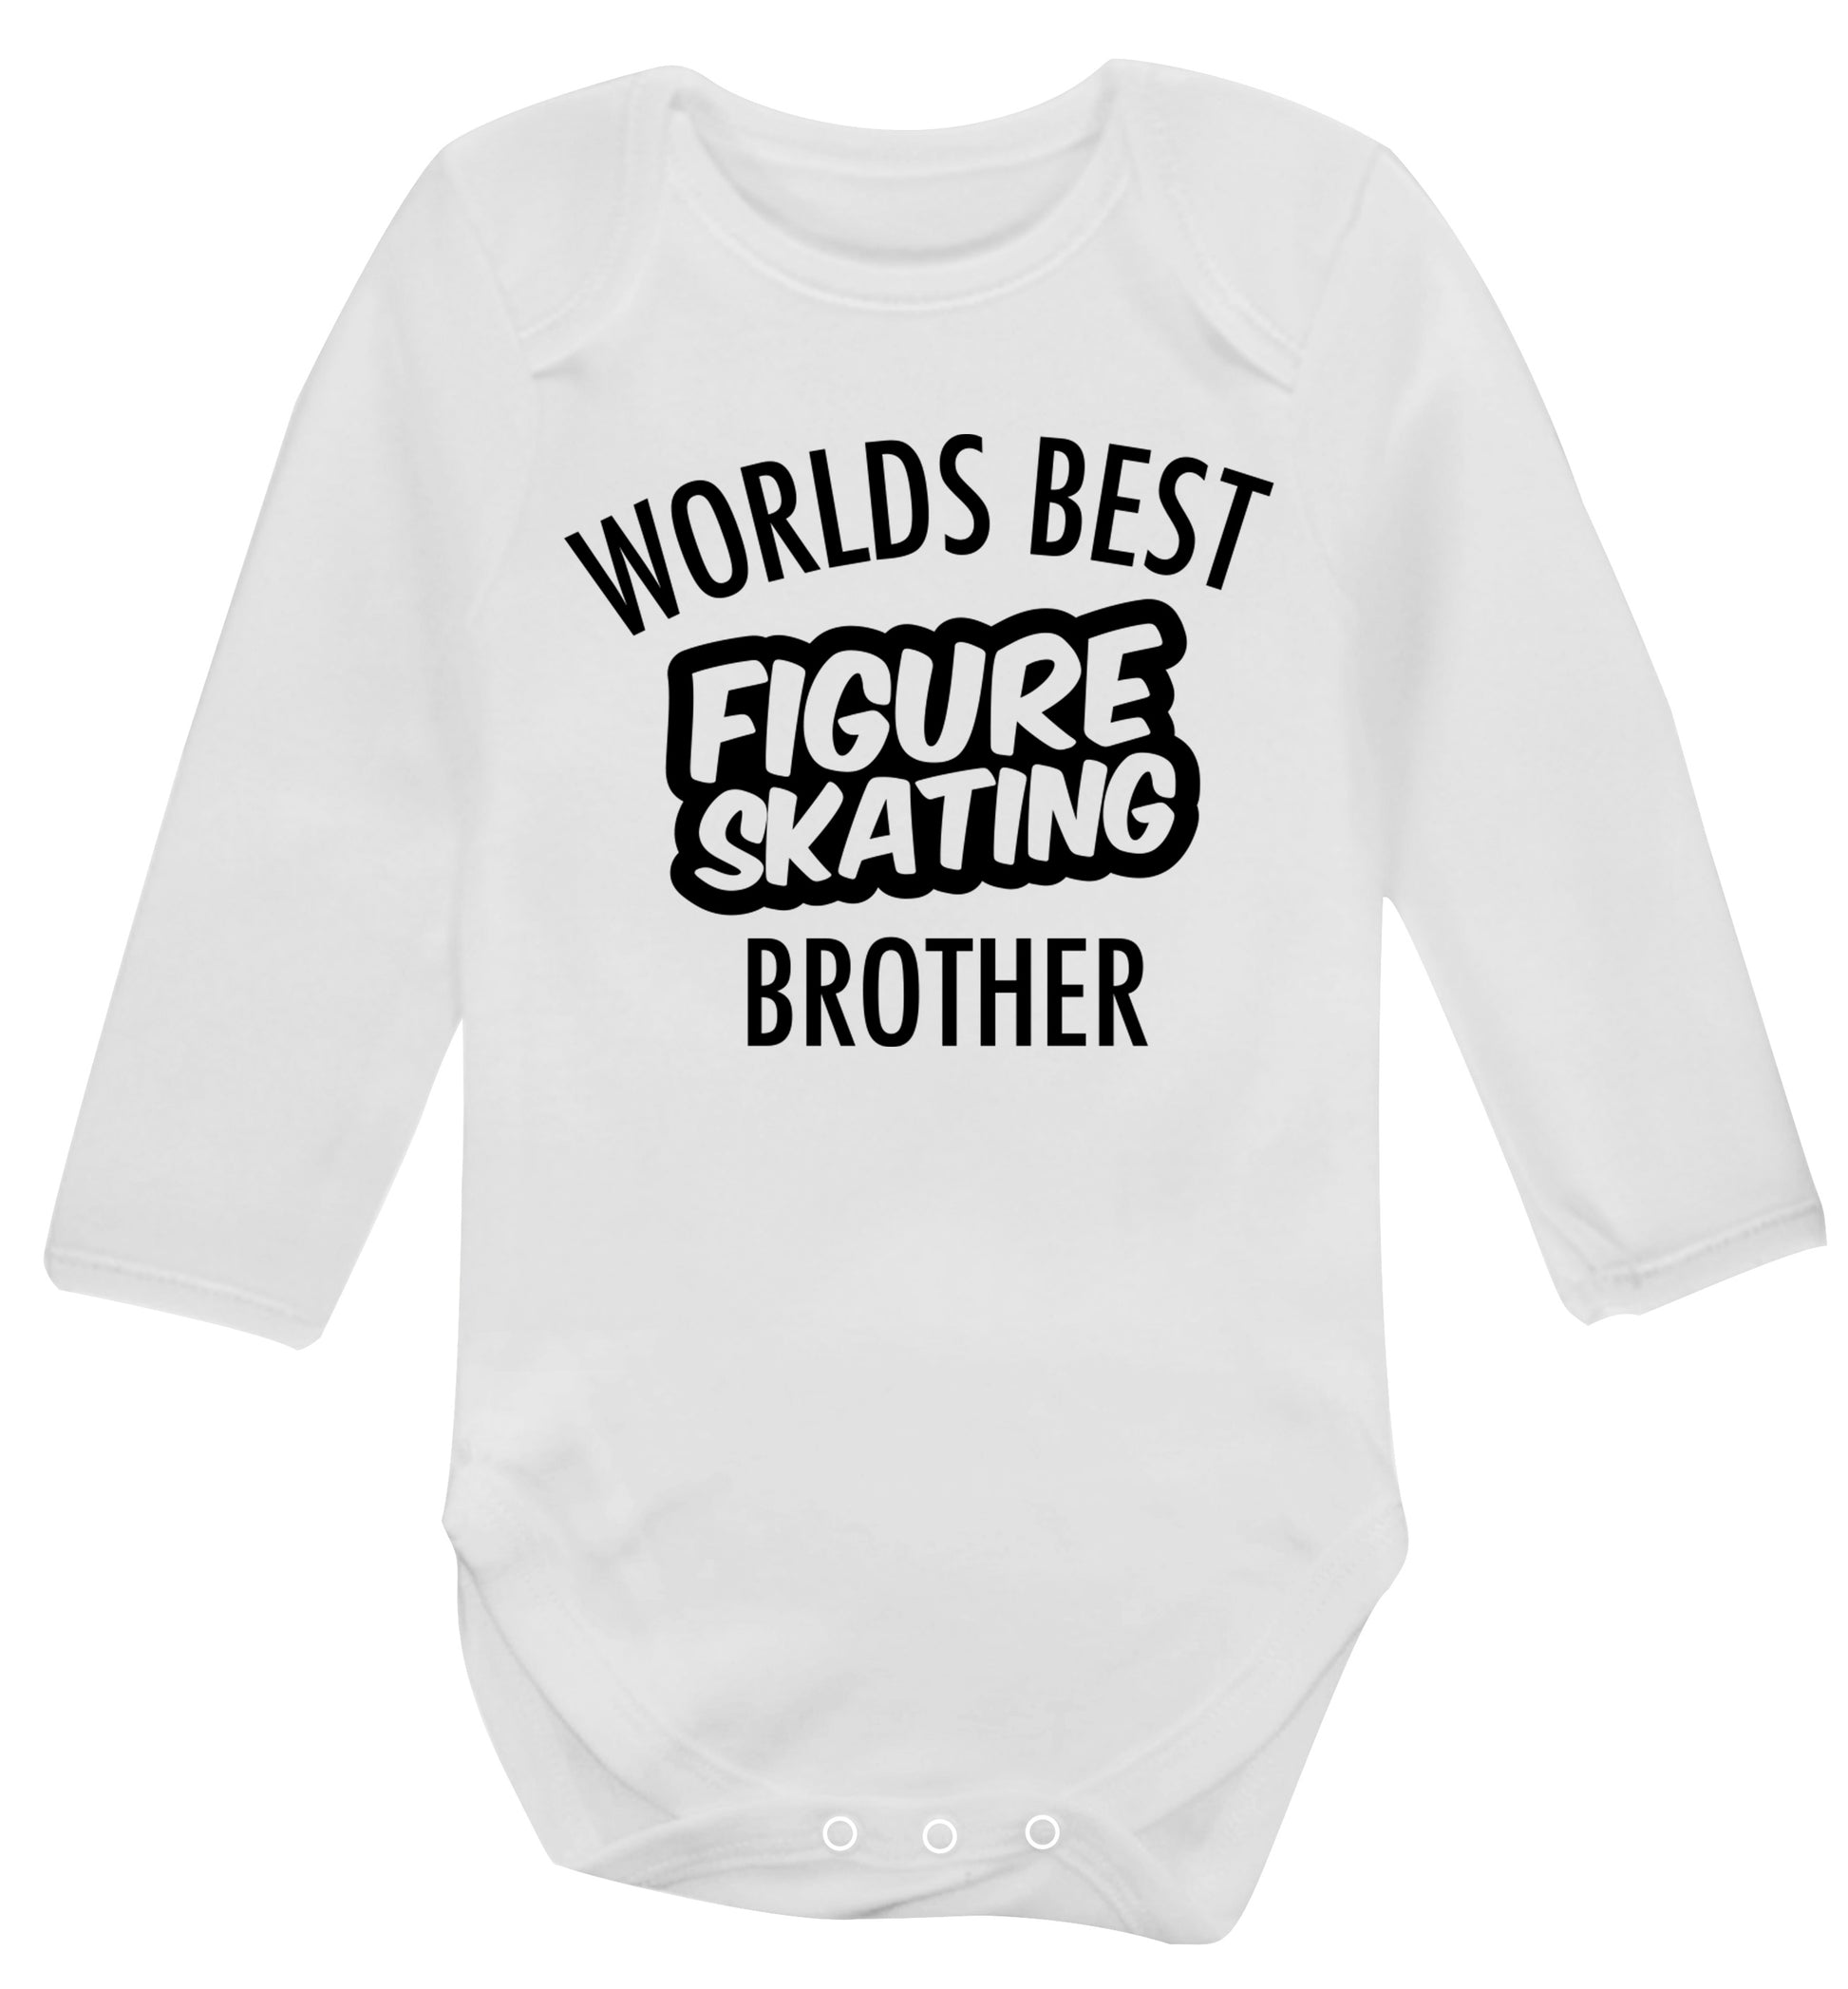 Worlds best figure skating brother Baby Vest long sleeved white 6-12 months